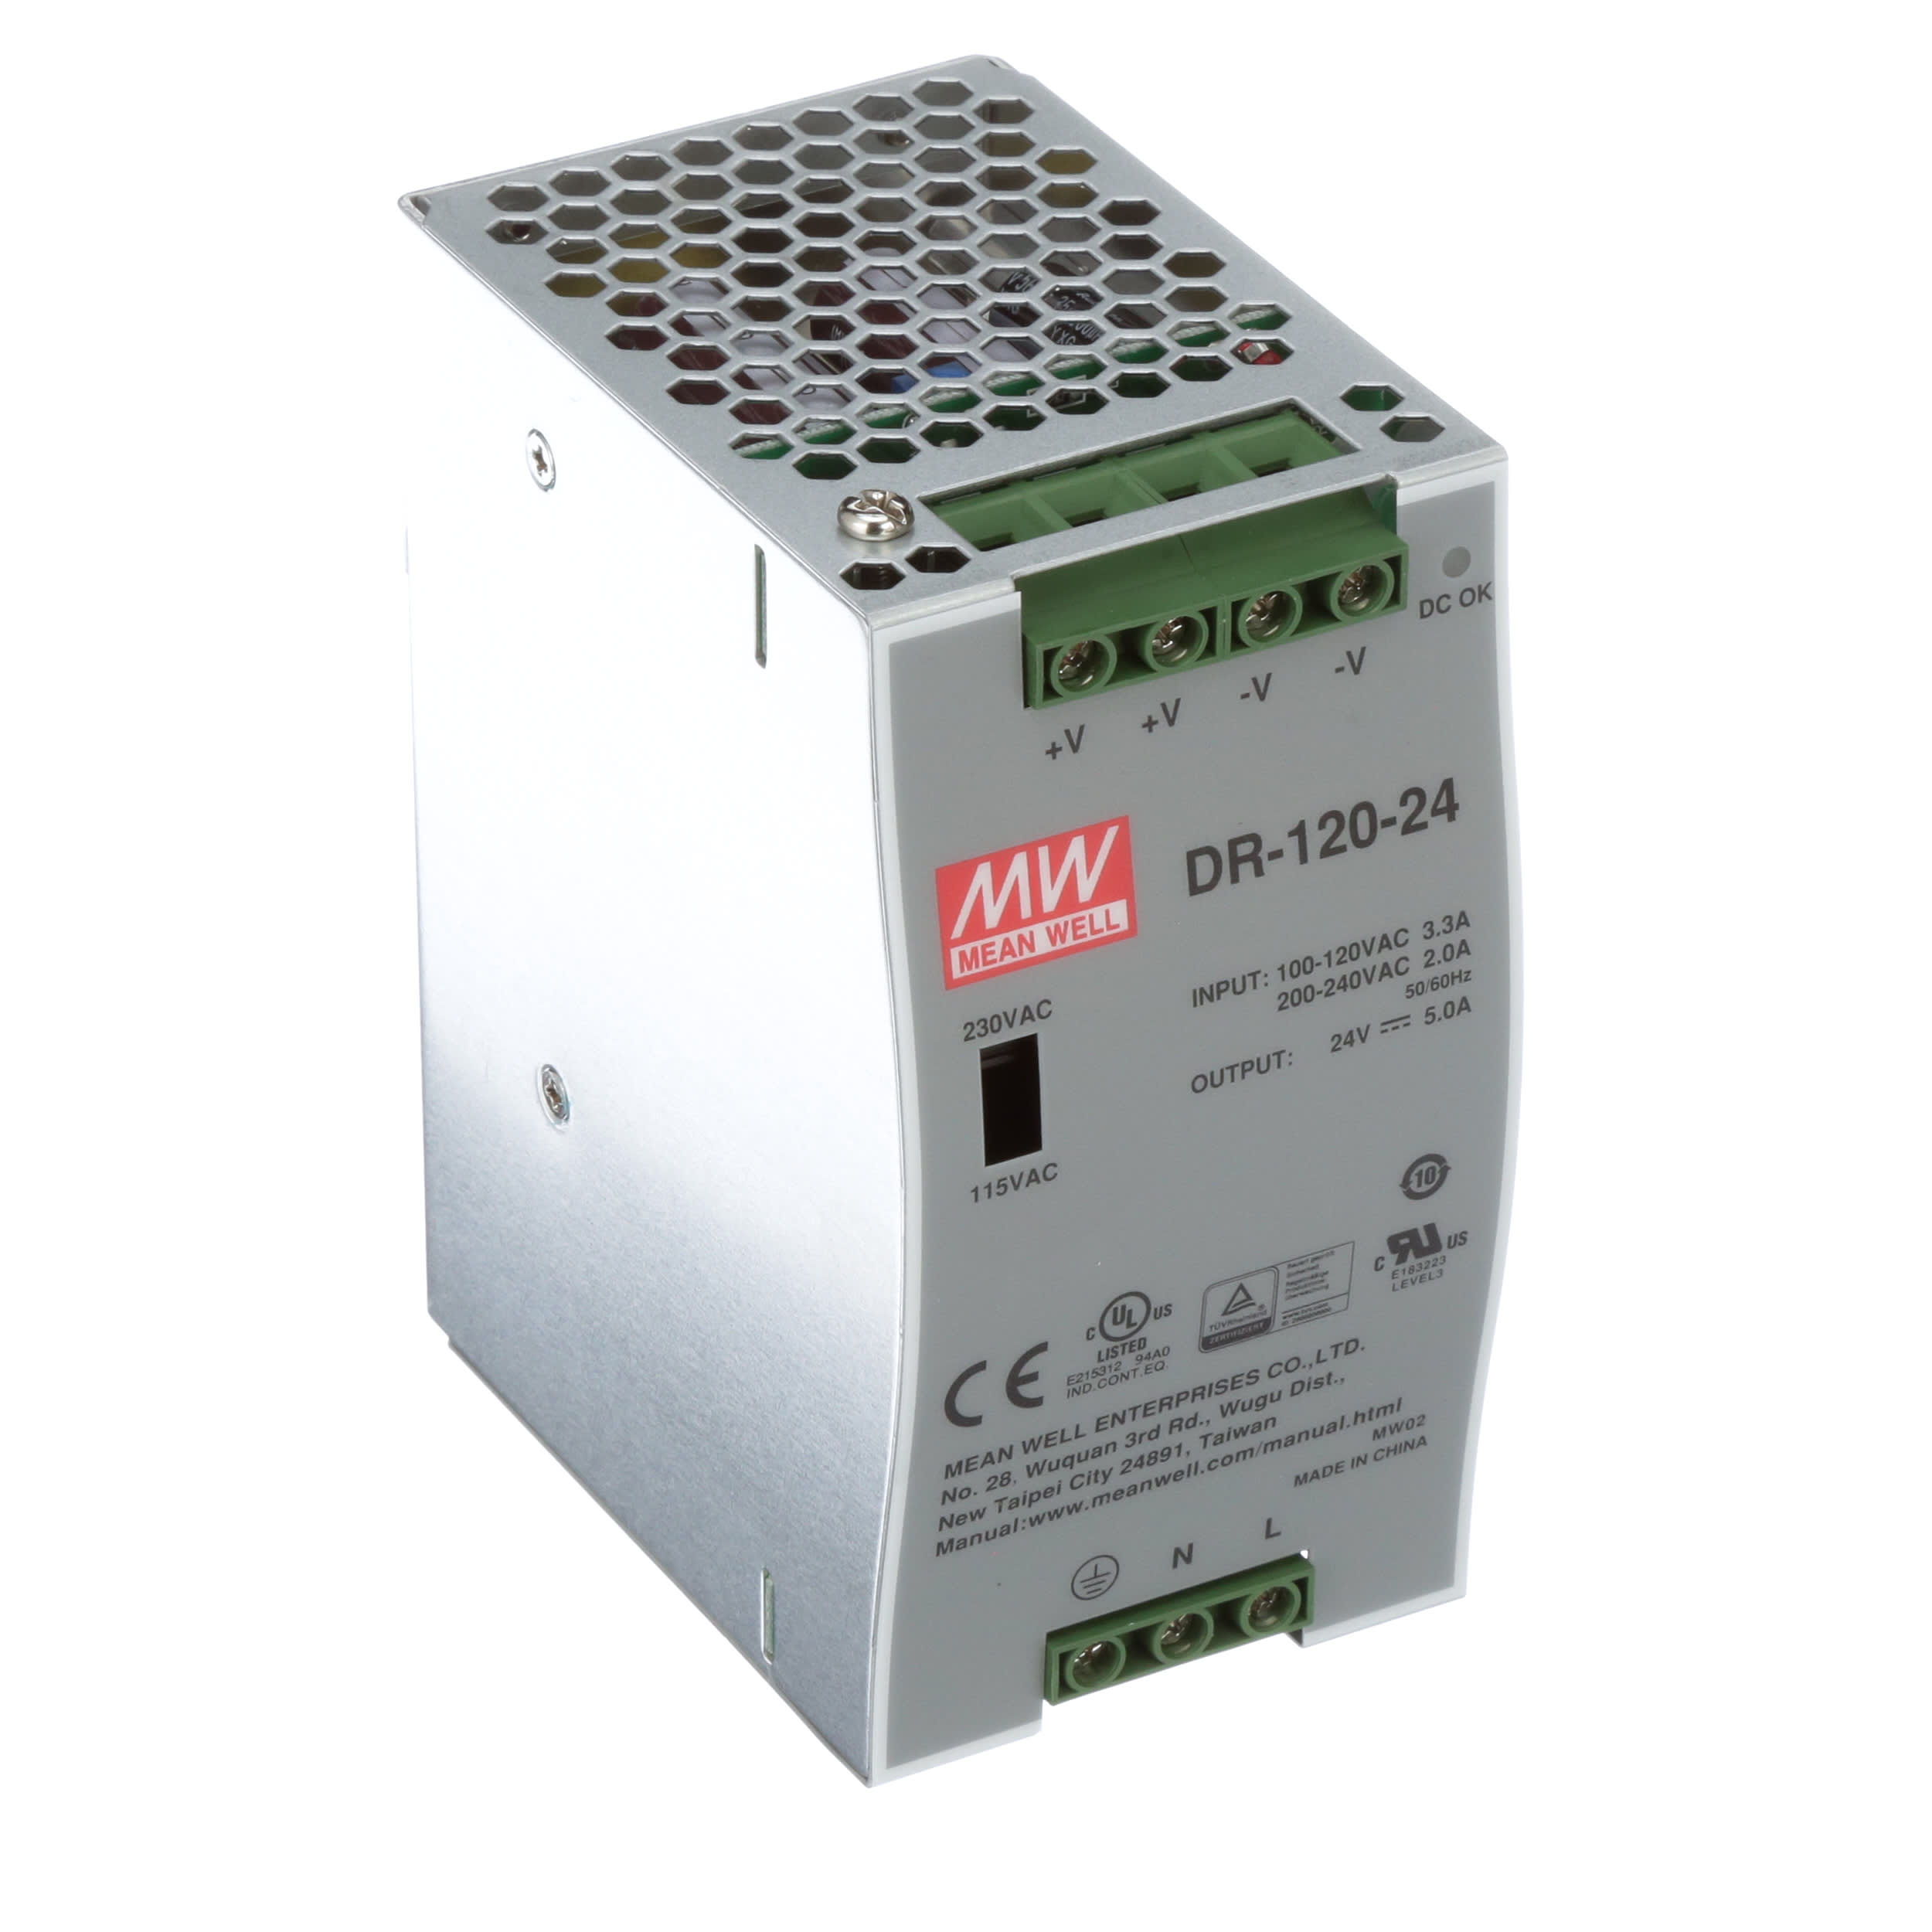 Mean Well DR-120-24 Power Supply Module for sale online 